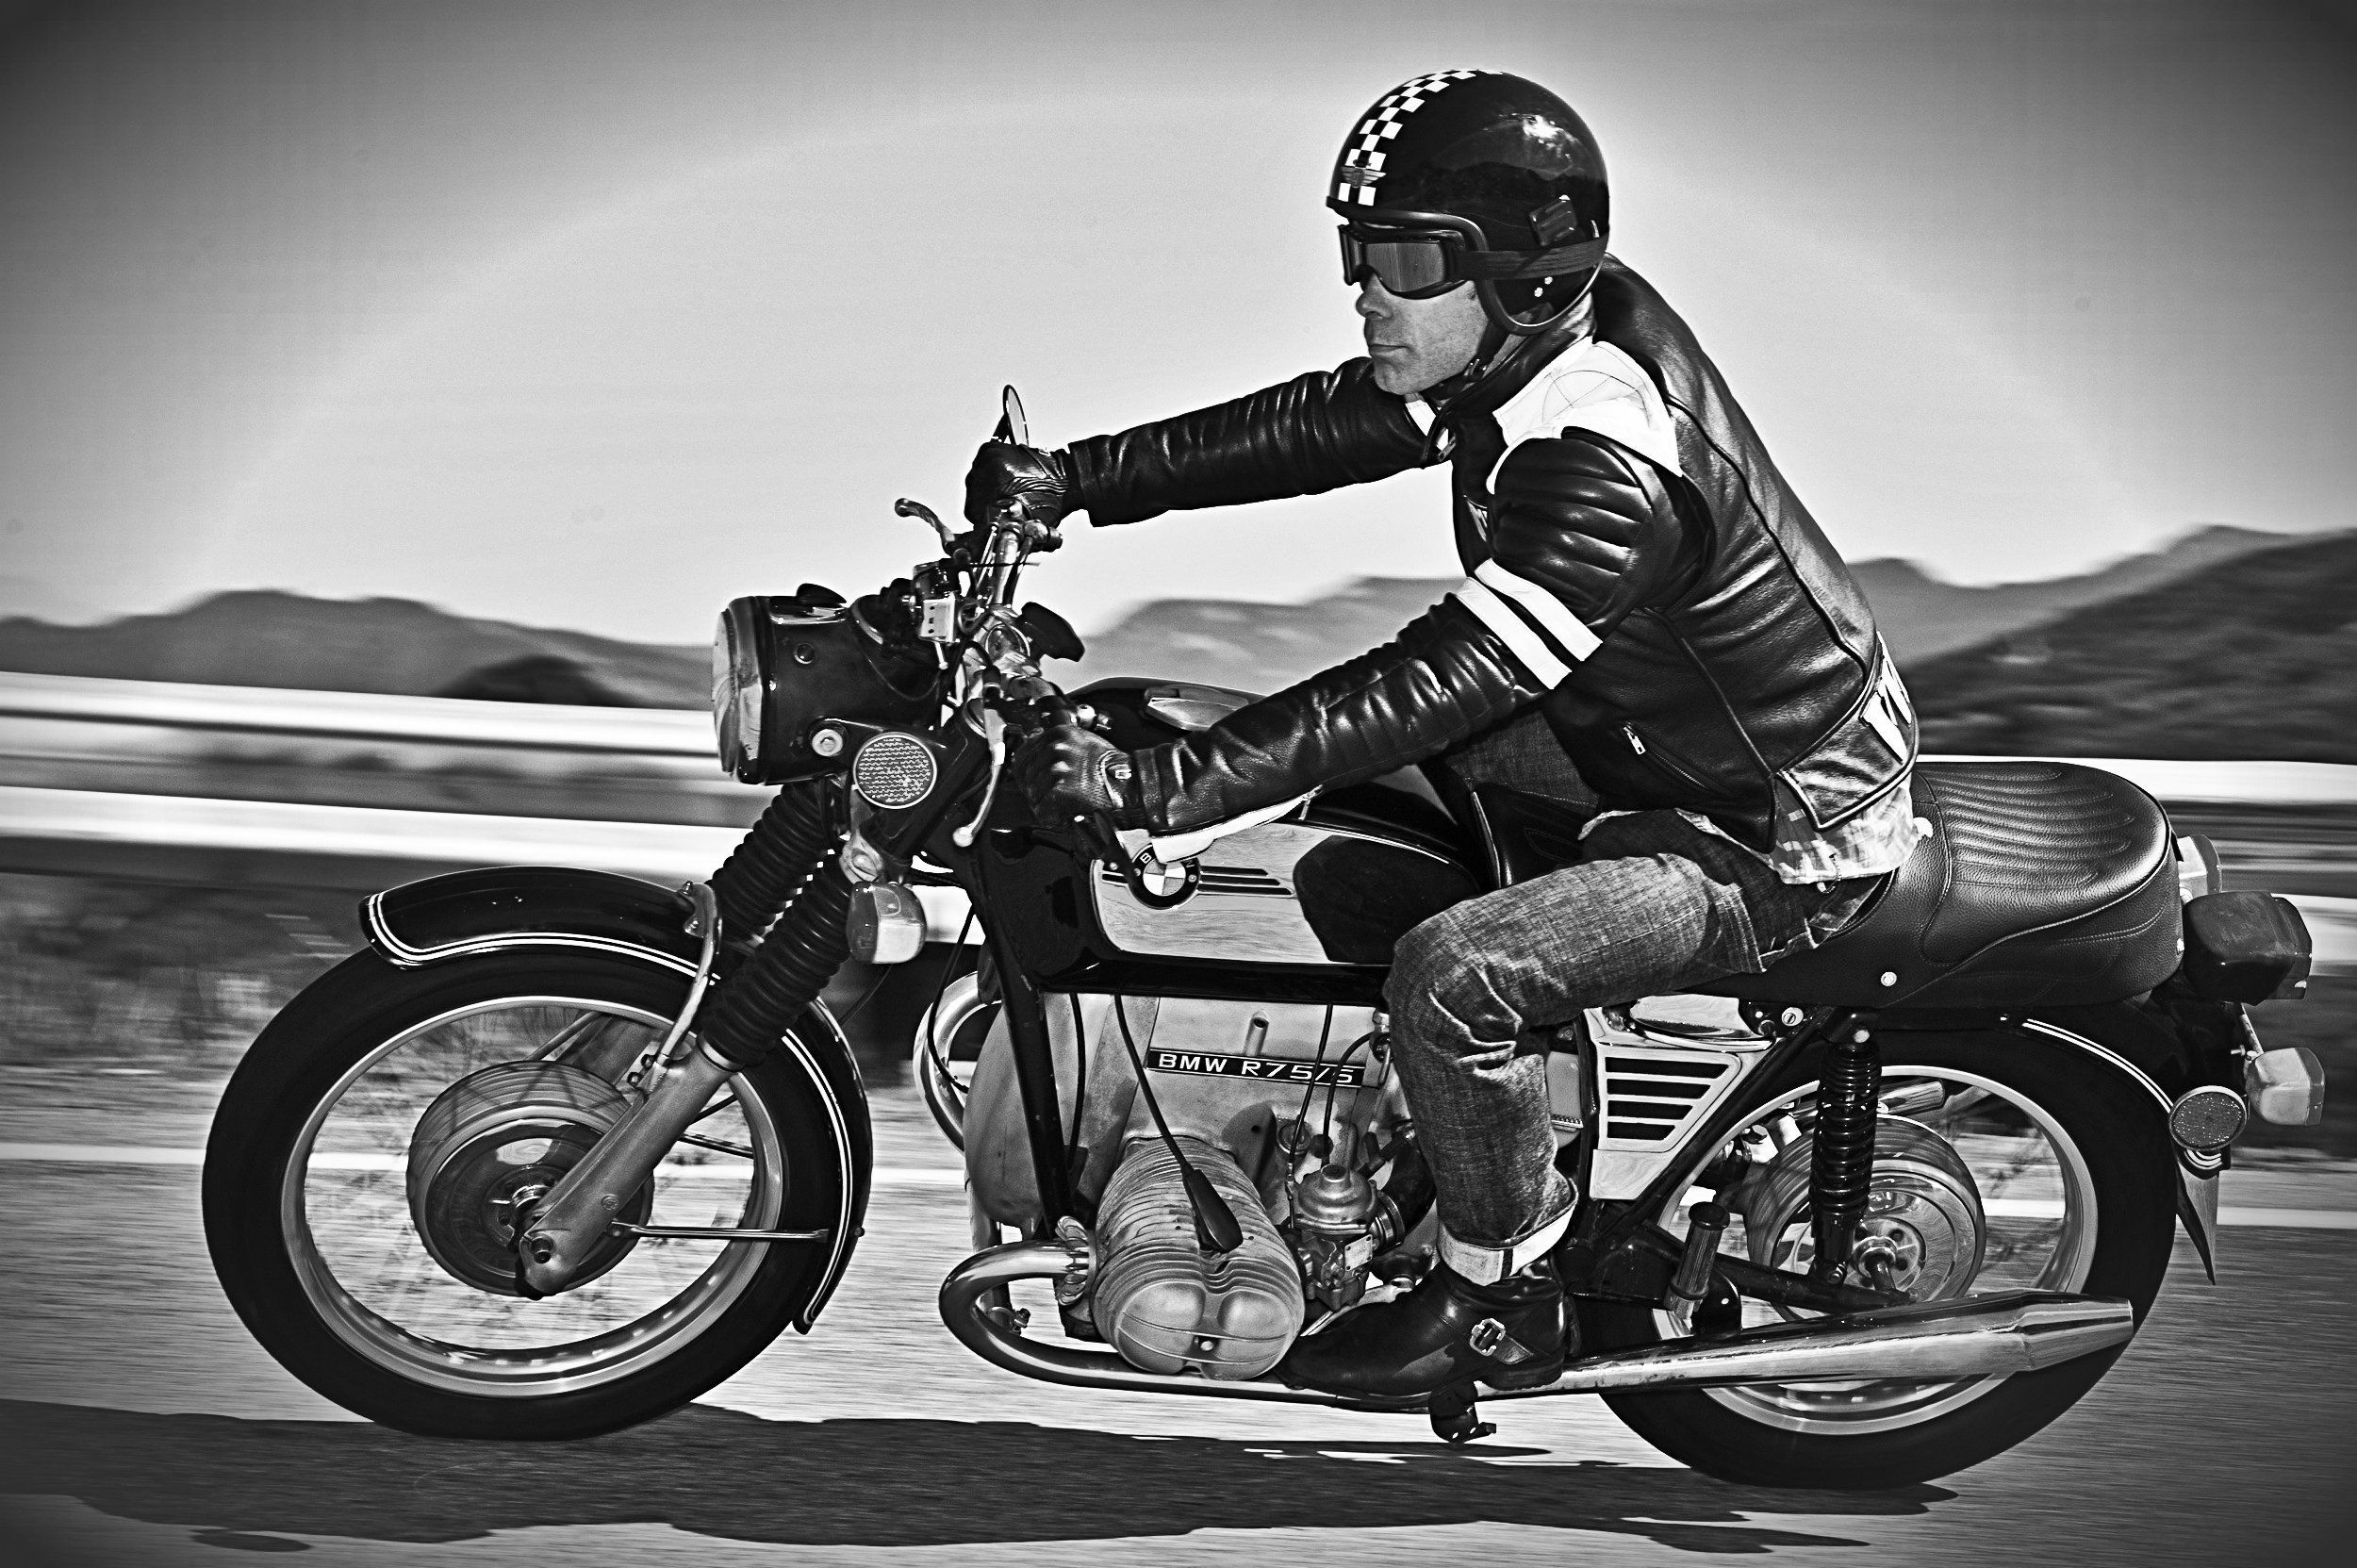 Vintage Motorcycle Wallpaper High Quality. Bmw motorcycle vintage, Bmw old, Motorcycle wallpaper